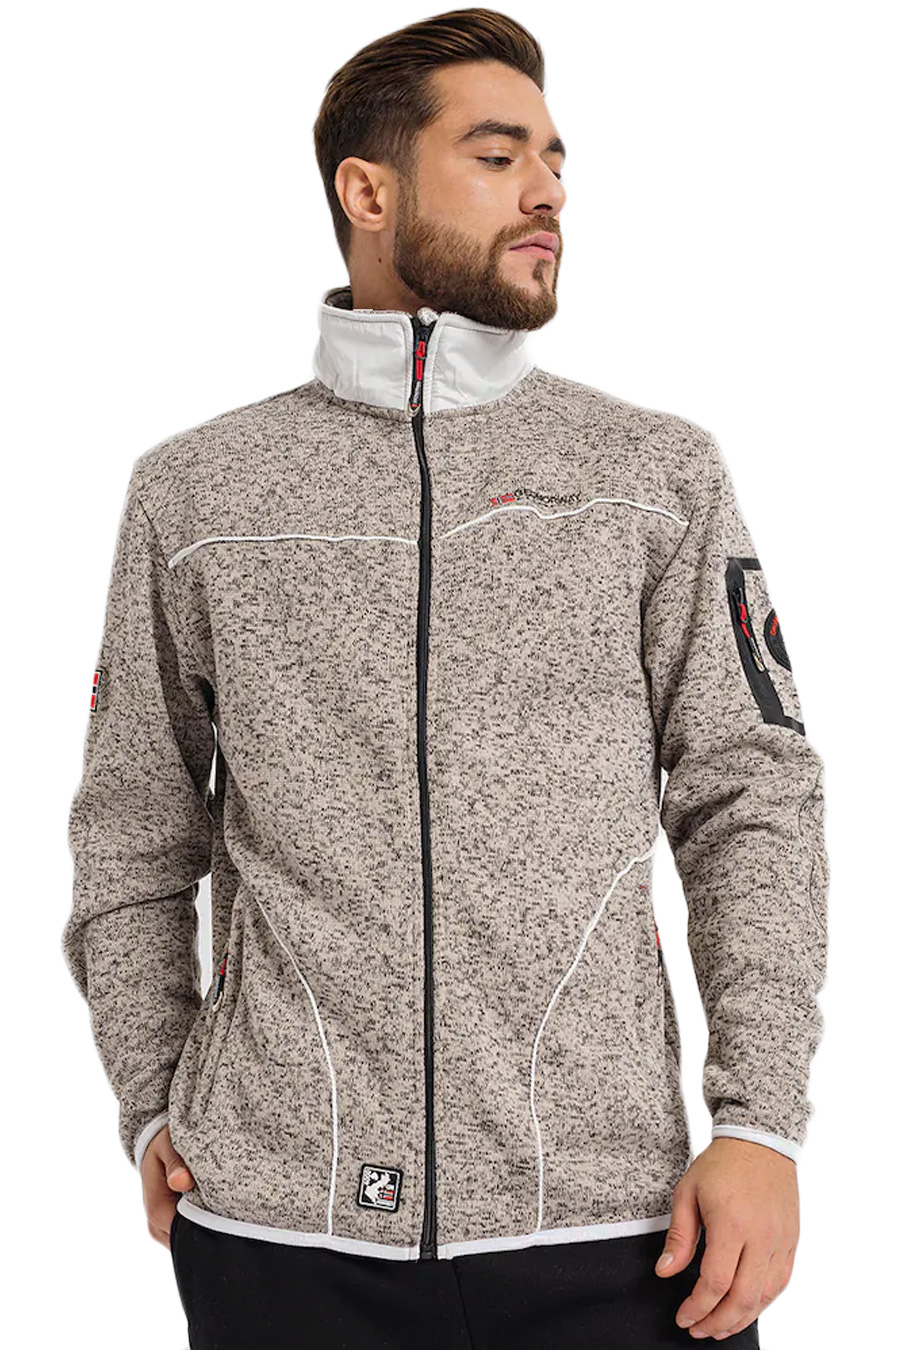 Spordijakid GEOGRAPHICAL NORWAY TOUMBA-Blended-Grey